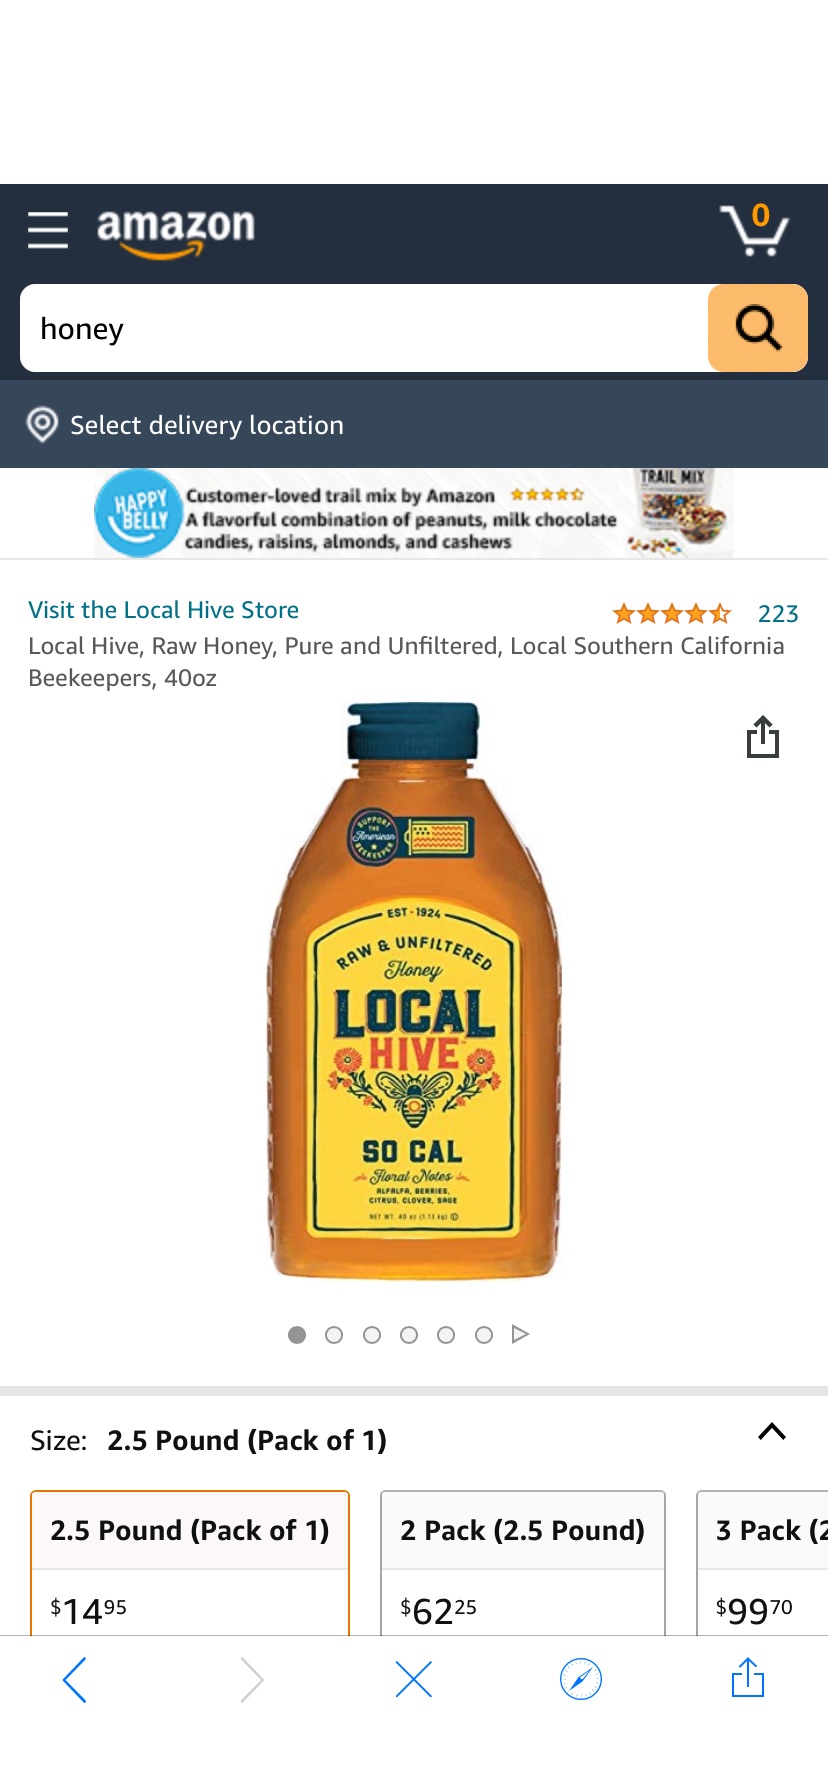 Amazon.com : Local Hive, 蜂蜜Raw Honey, Pure and Unfiltered, Local Southern California Beekeepers, 40oz : Grocery & Gourmet Food